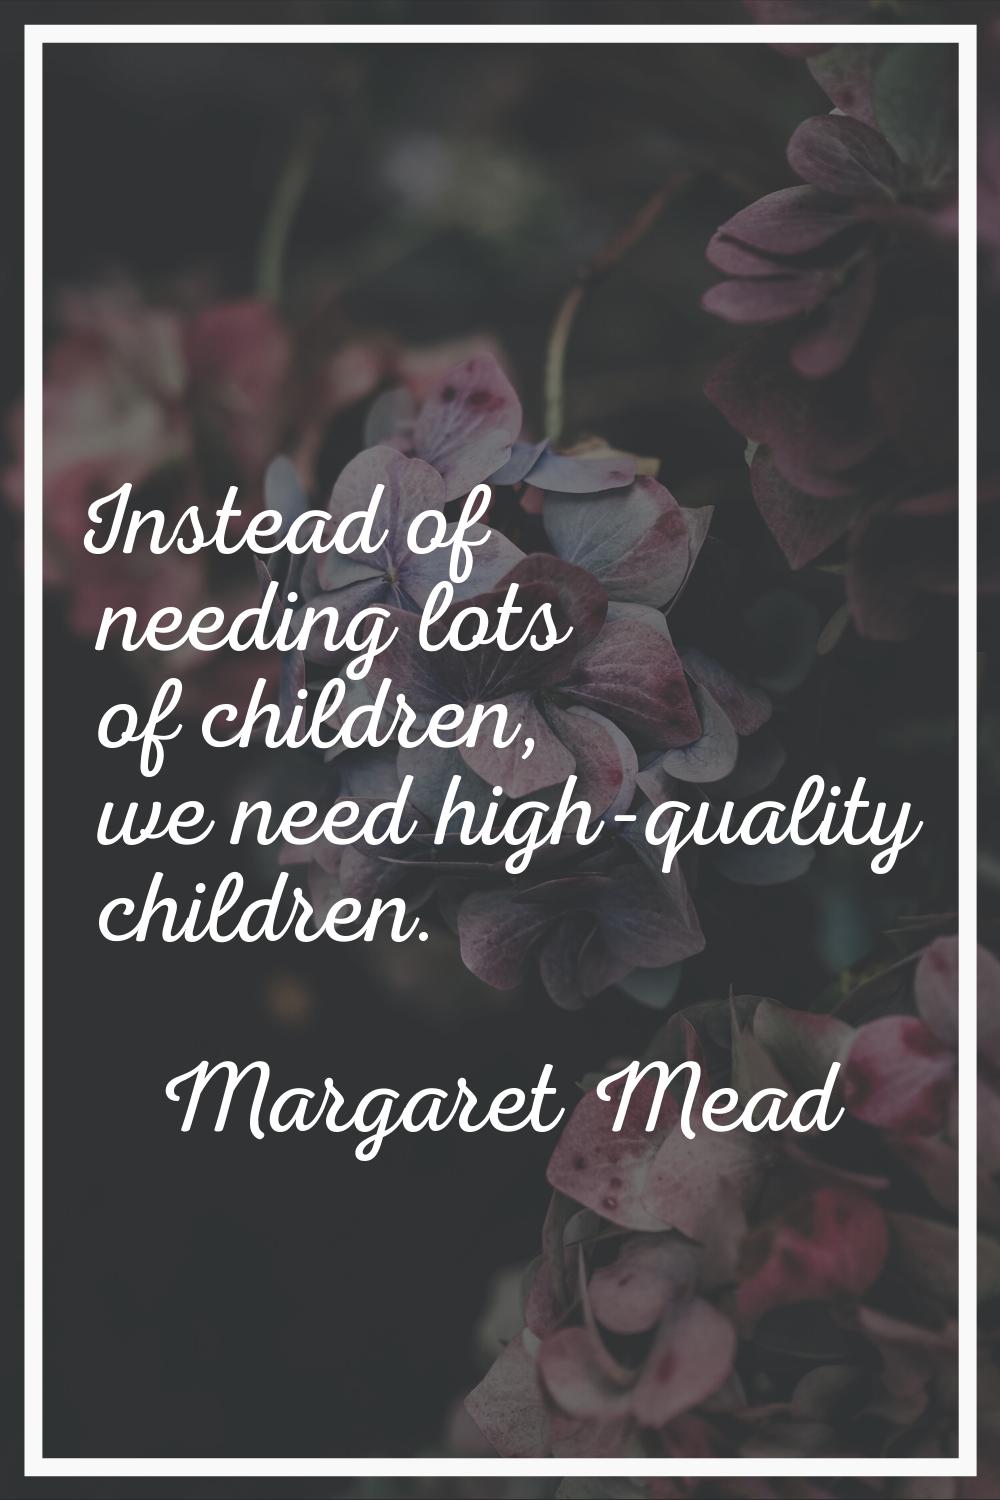 Instead of needing lots of children, we need high-quality children.